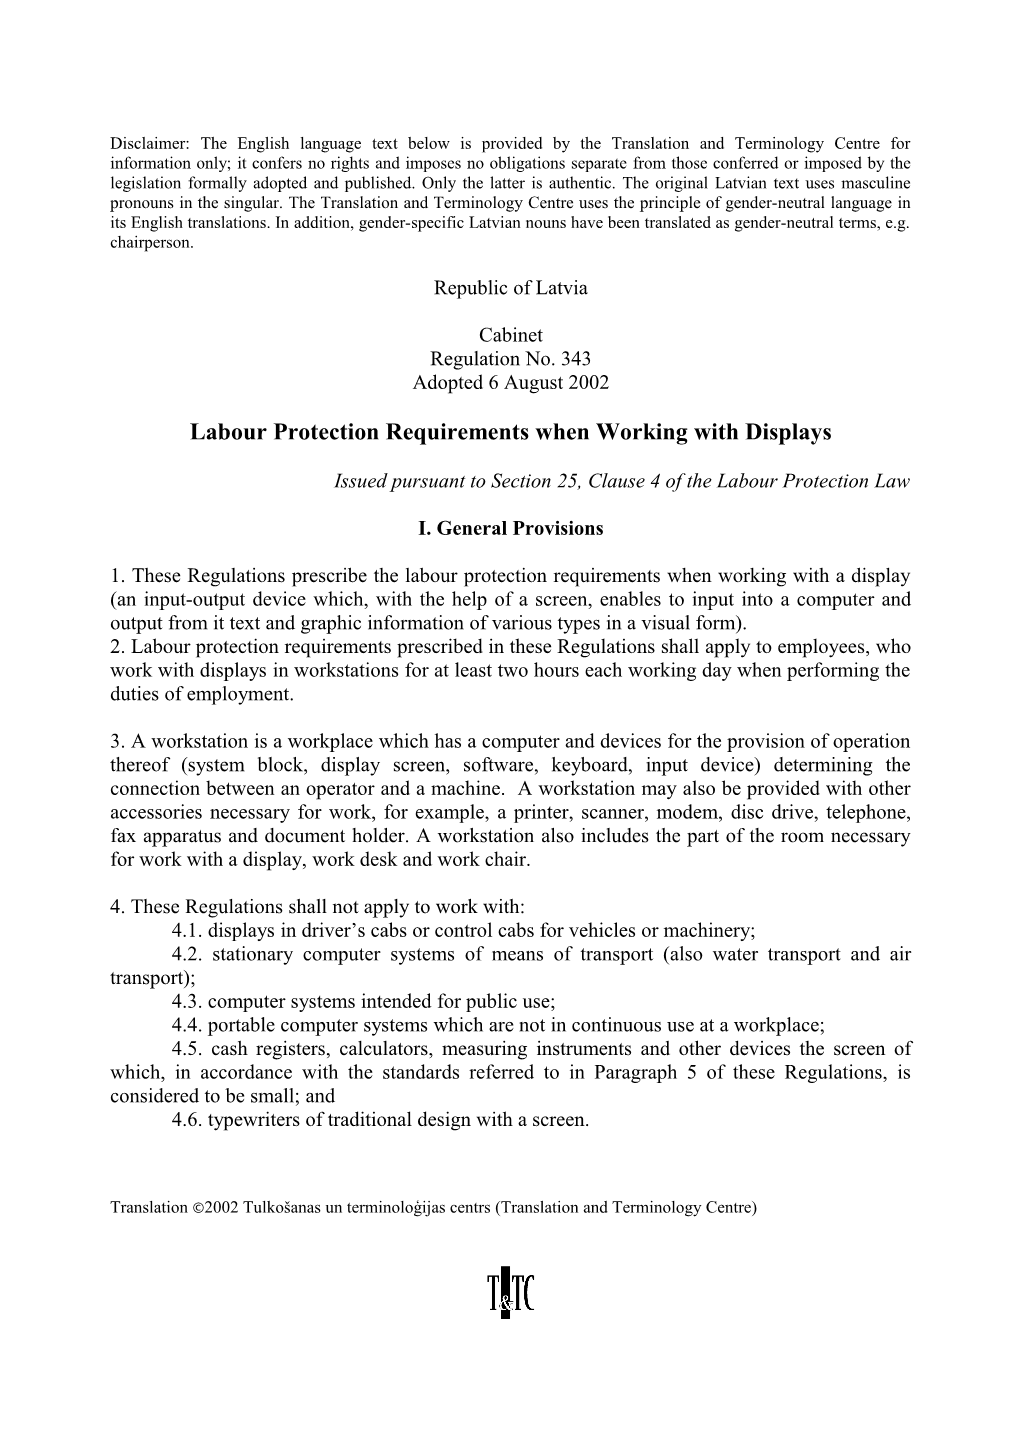 Labour Protection Requirements When Working with Displays